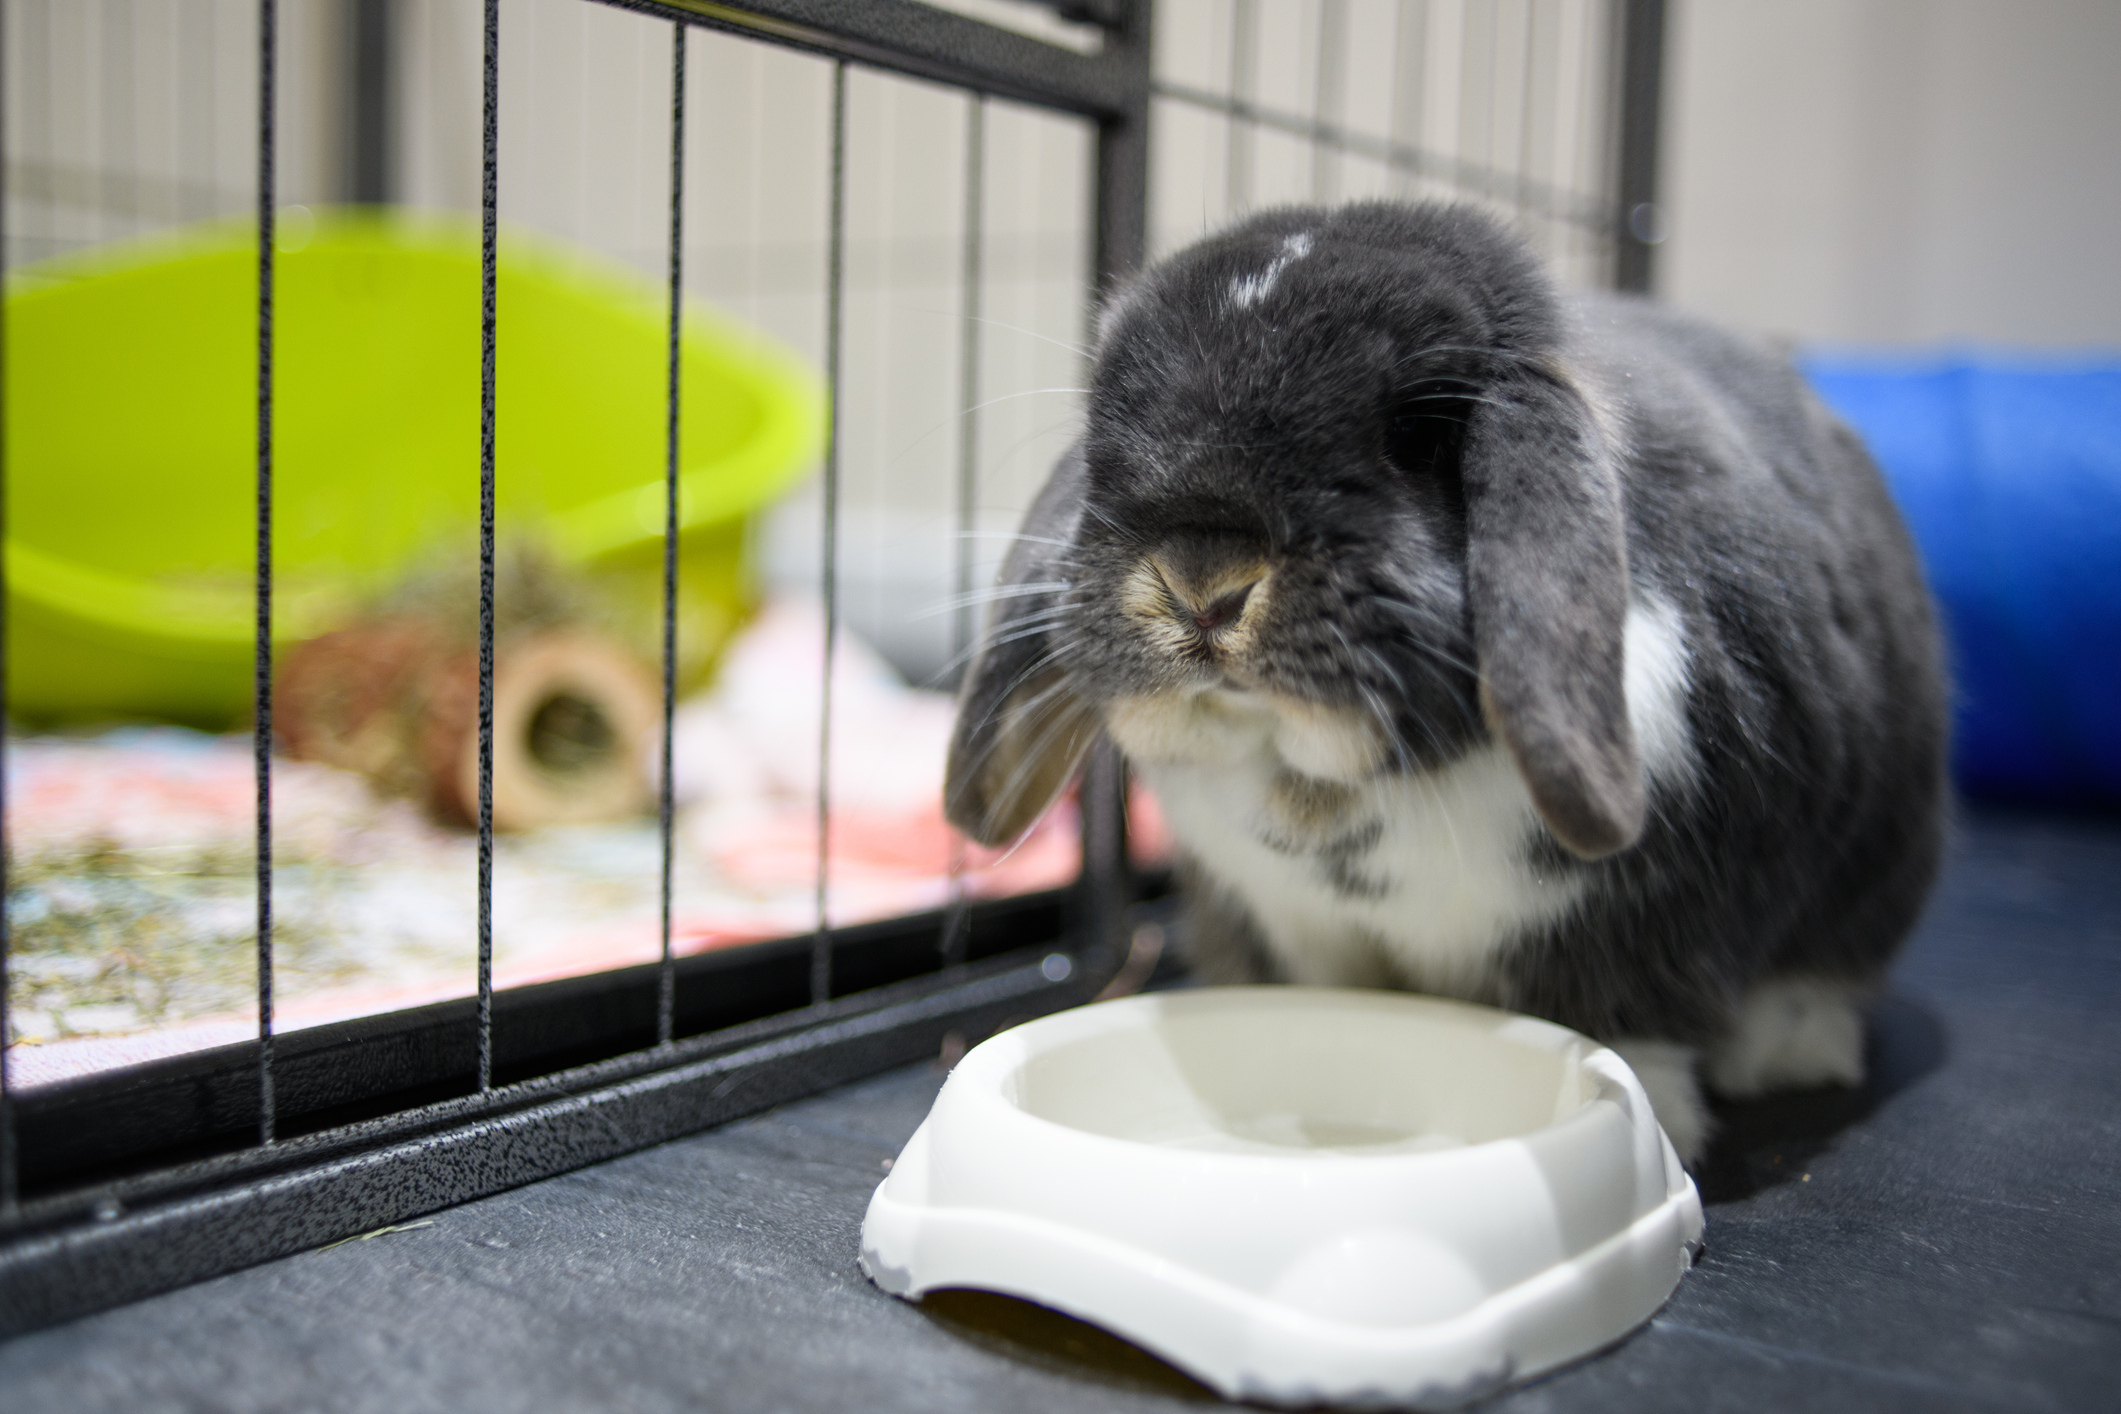 A little gray bunny sits at a water dish on a mat.